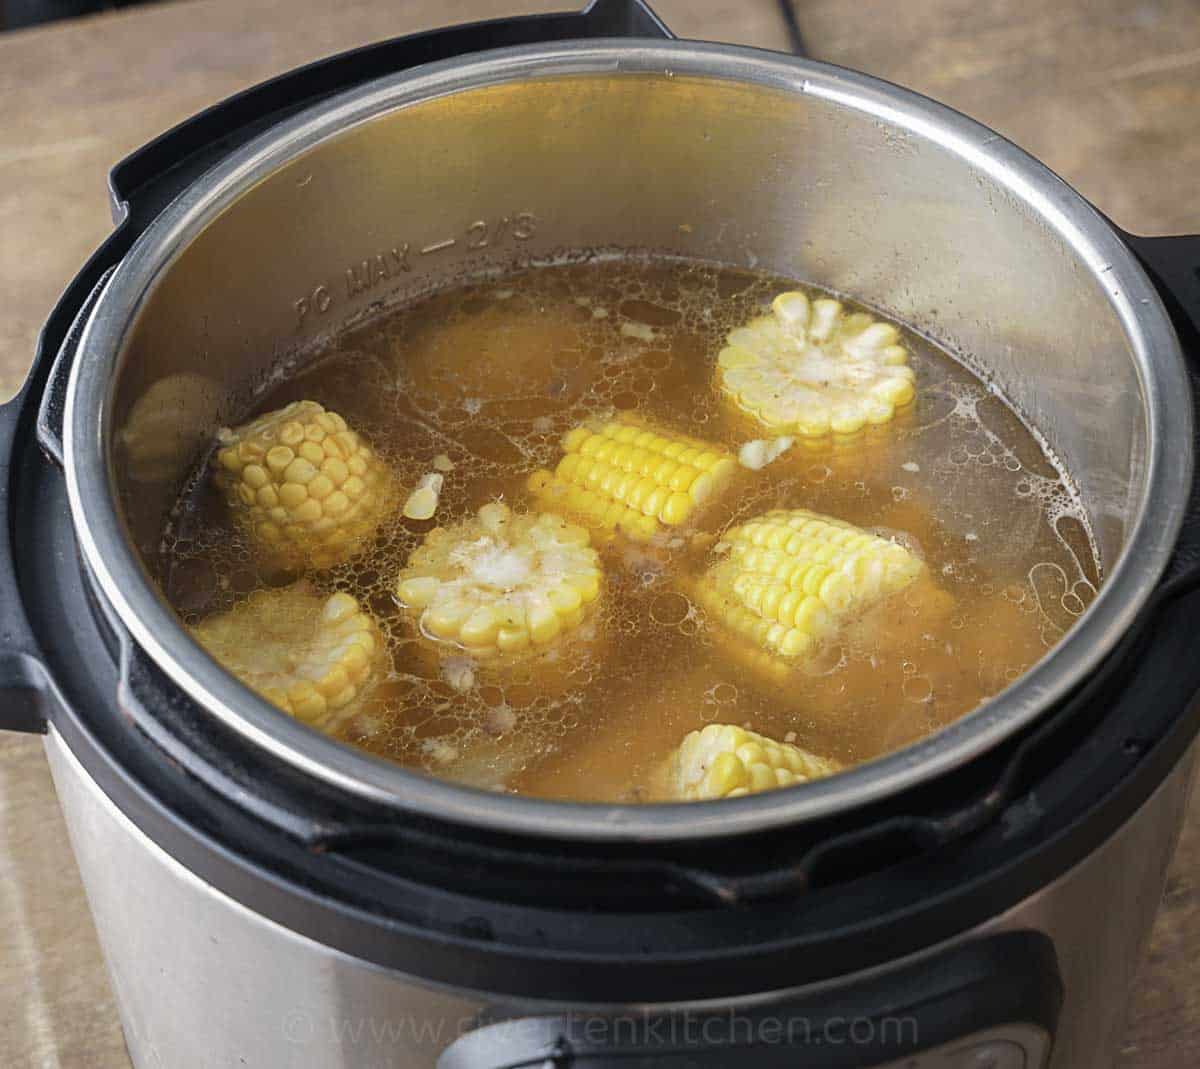 Beef bone soup cooked in an instant pot.